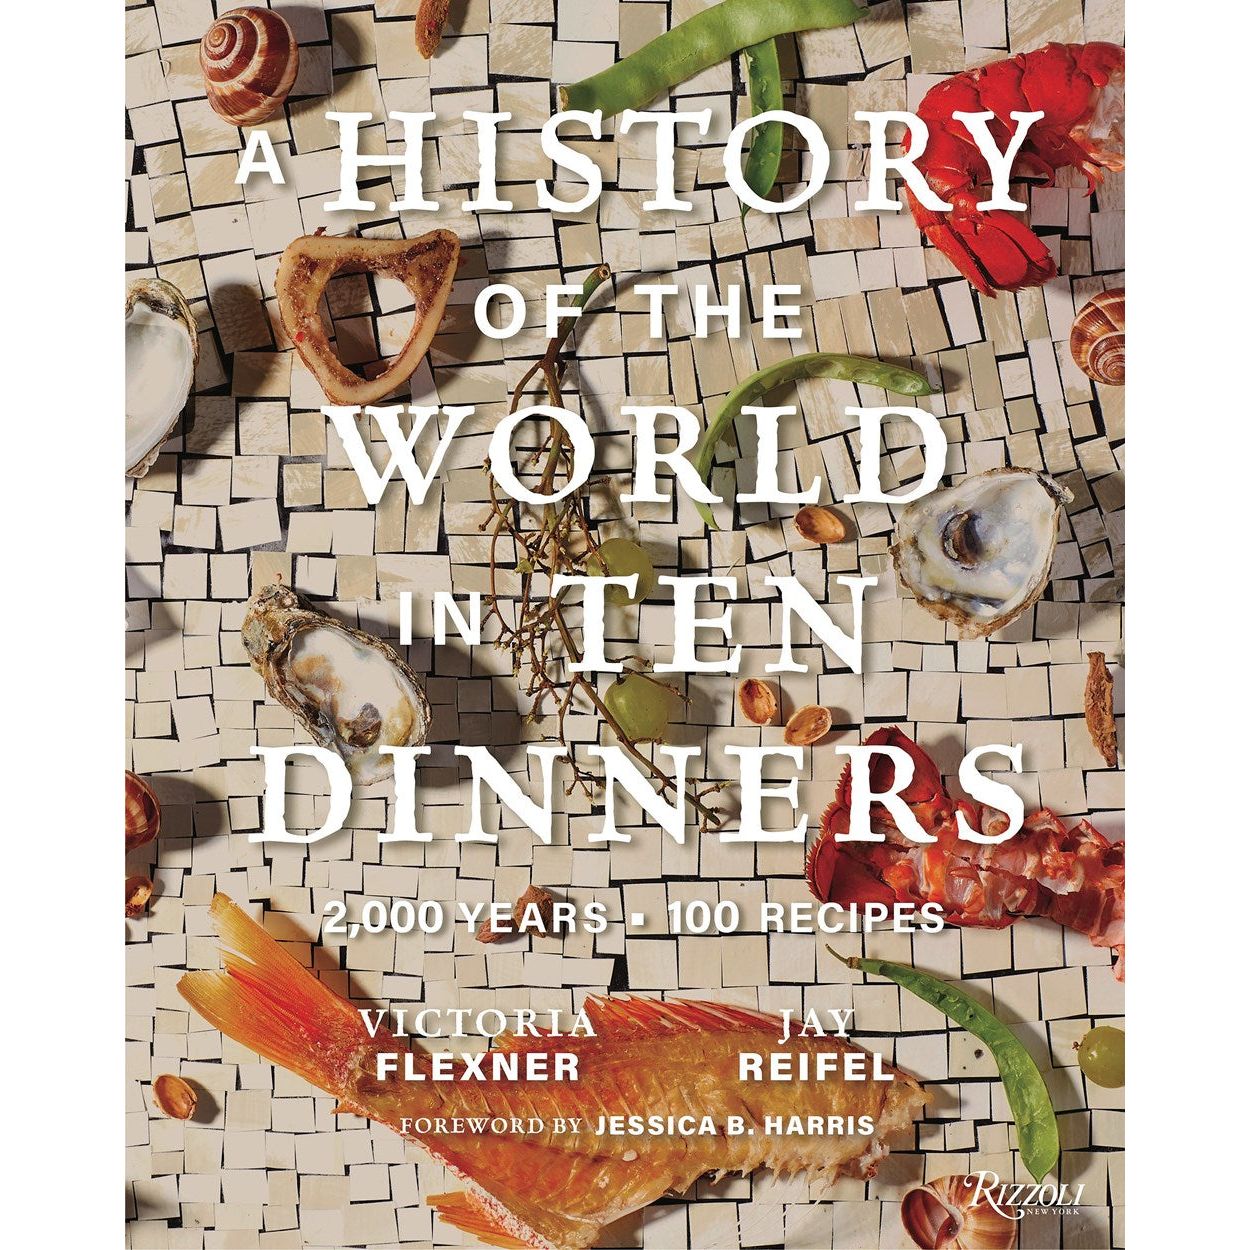 A History of the World in 10 Dinners : 2,000 Years, 100 Recipes (Victoria Flexner, Jay Reifel, forward by Dr. Jessica B. Harris)